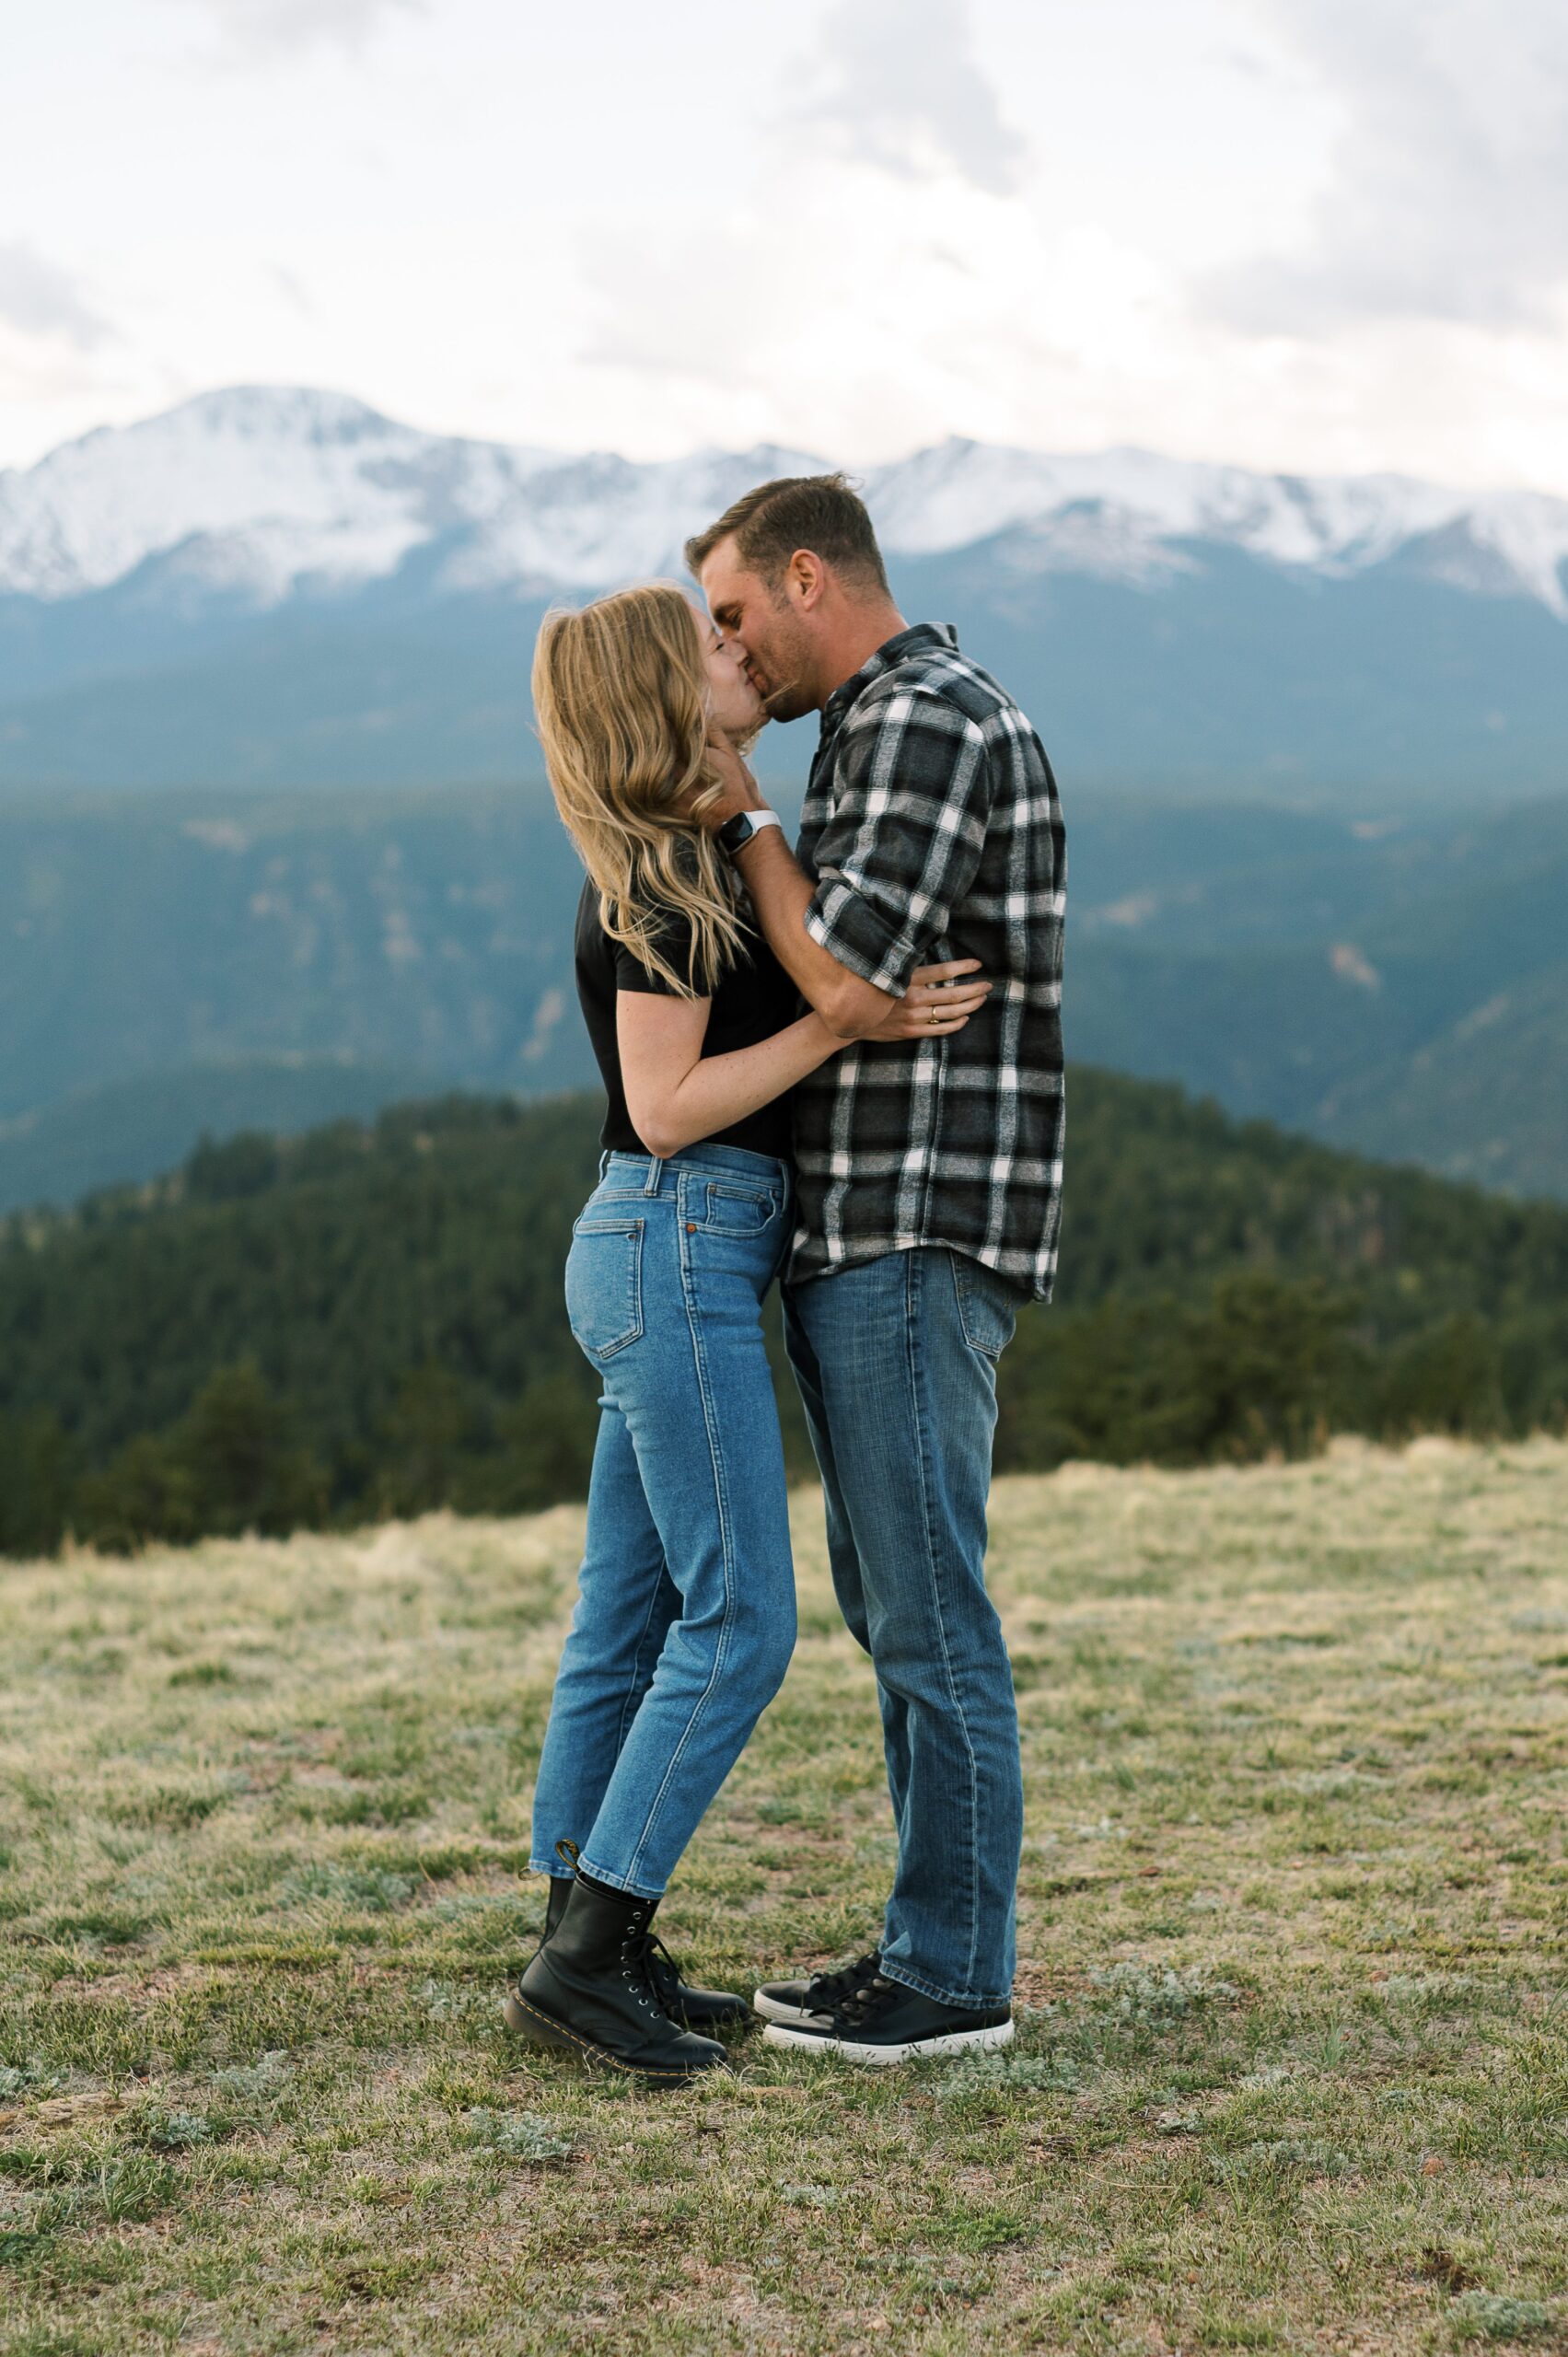 Couple kissing with views of mountains in background.